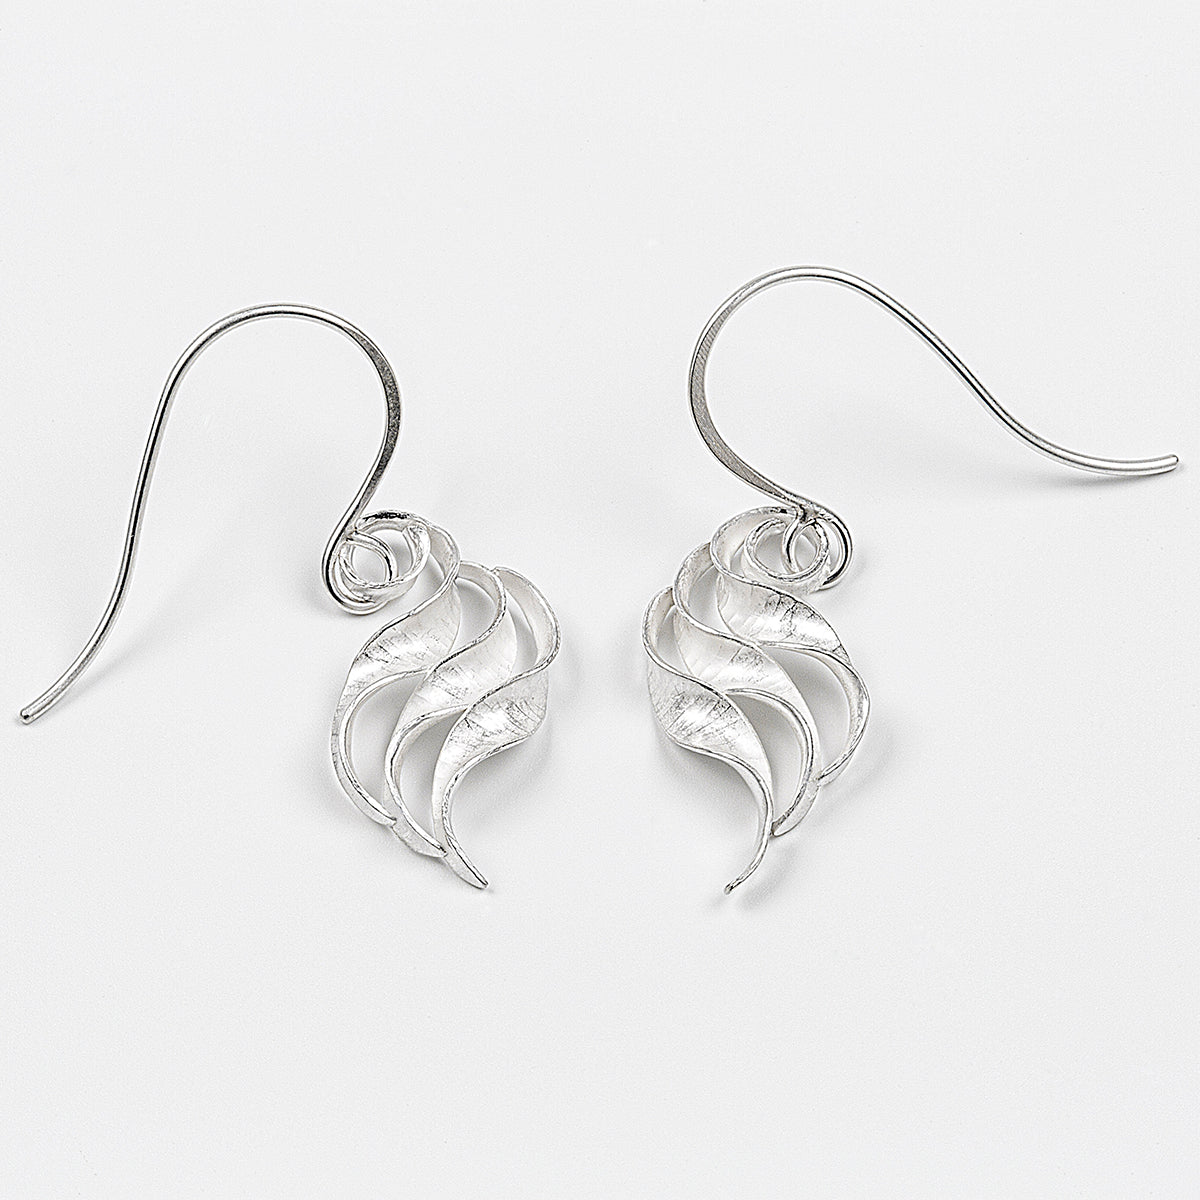 A pair of silver wing earrings made from recycled sterling silver by the process of anticlastic raising. These drop earrings have a hammered texture and non-reflective finish. Each consists of three s-shaped twisted units nested together.  Here a pair of the smaller earrings is shown from the front.